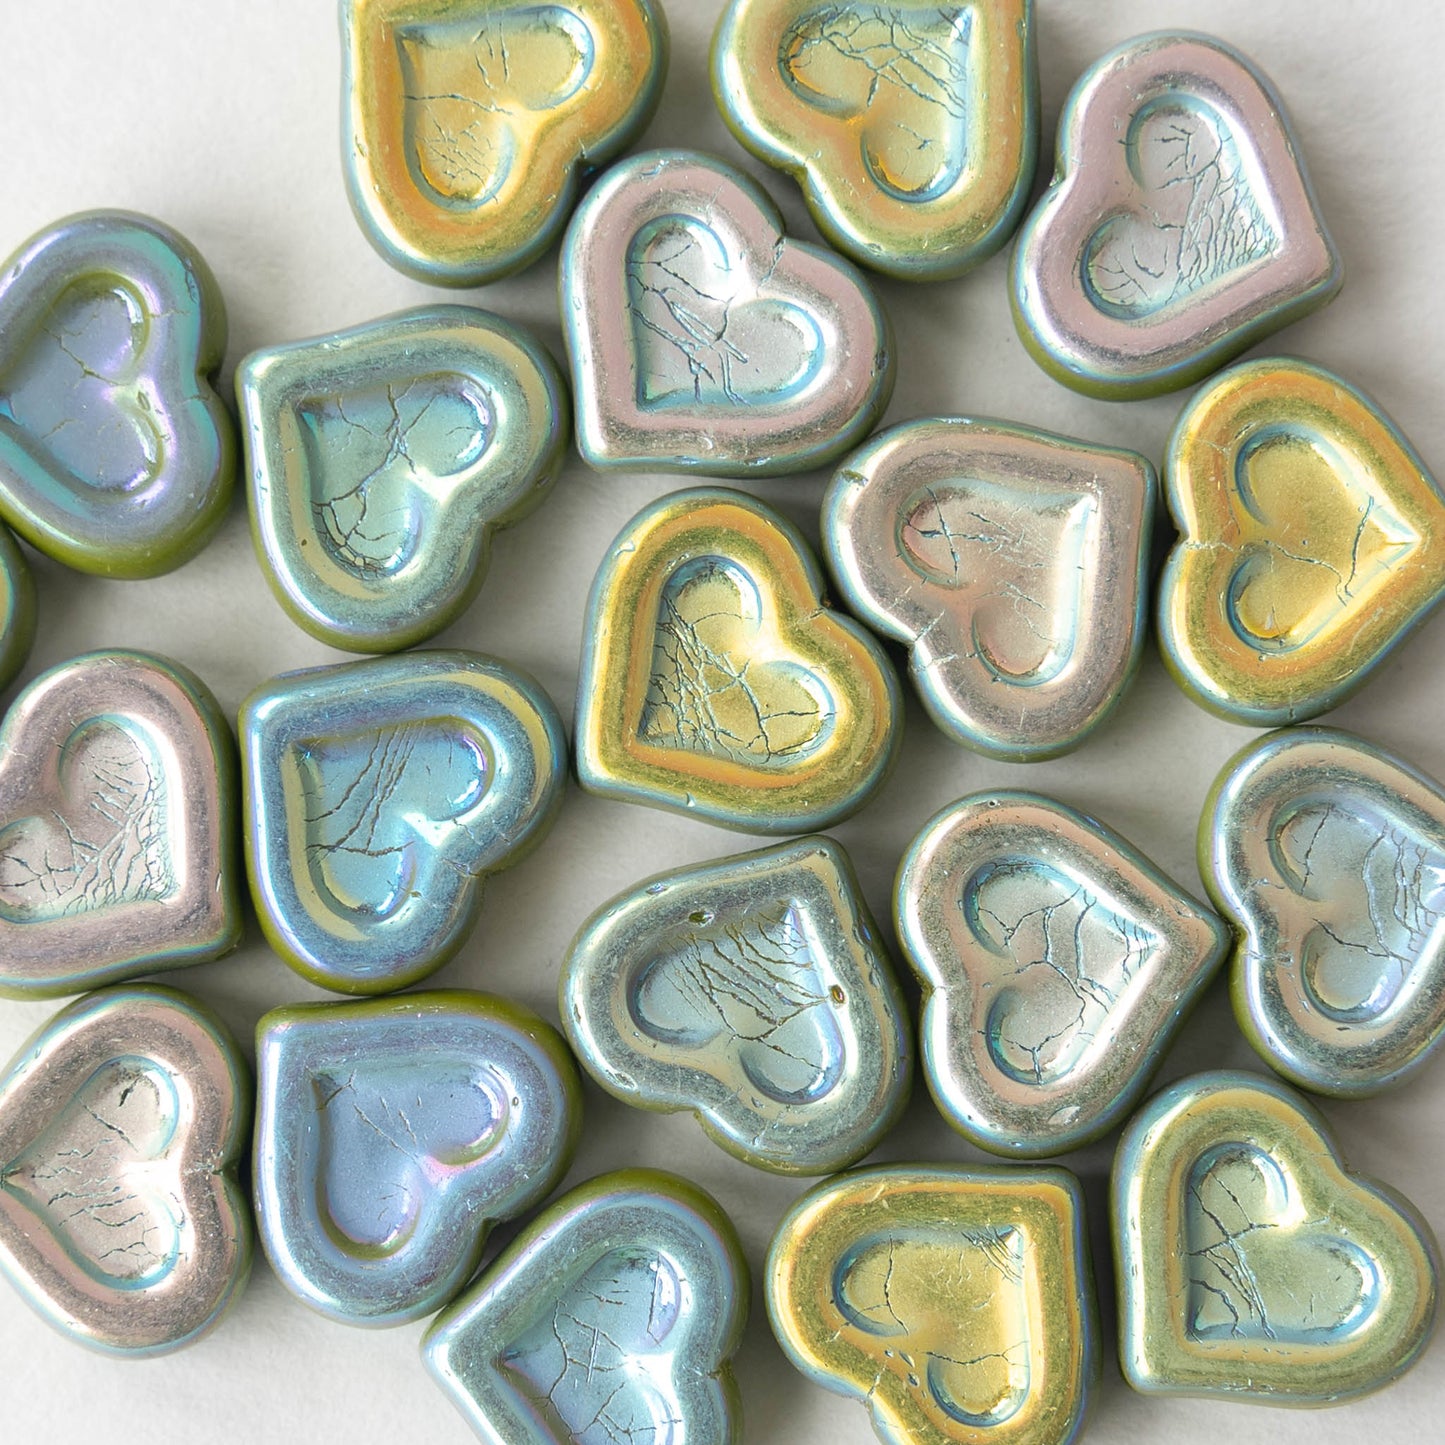 14mm Heart Beads - Olive Green Iridescent AB - 10 hearts